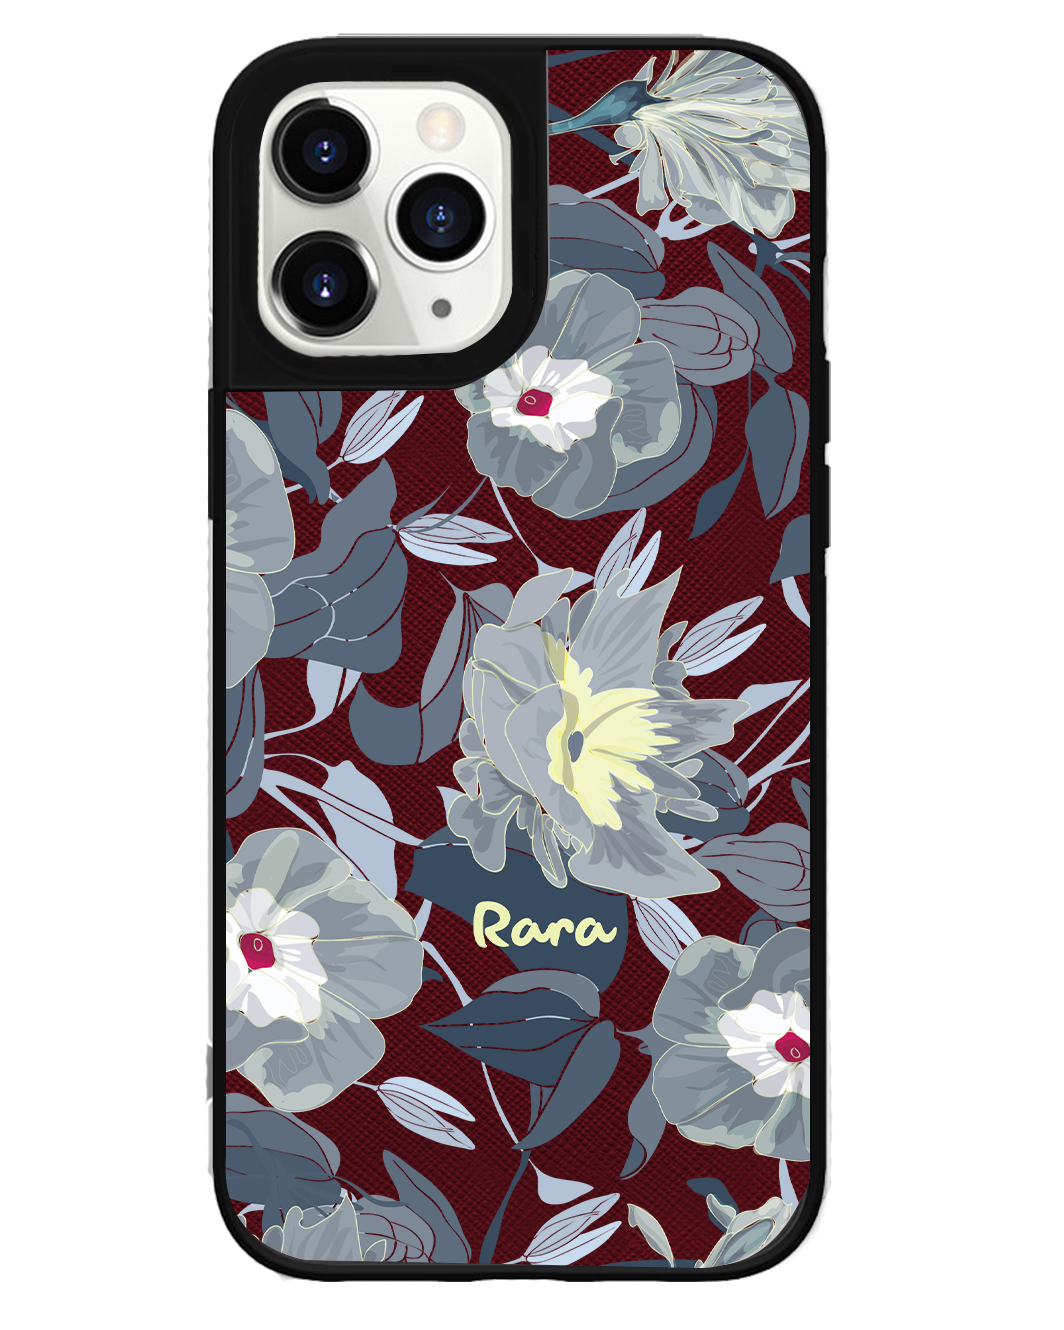 iPhone Leather Grip Case - September Morning Glory